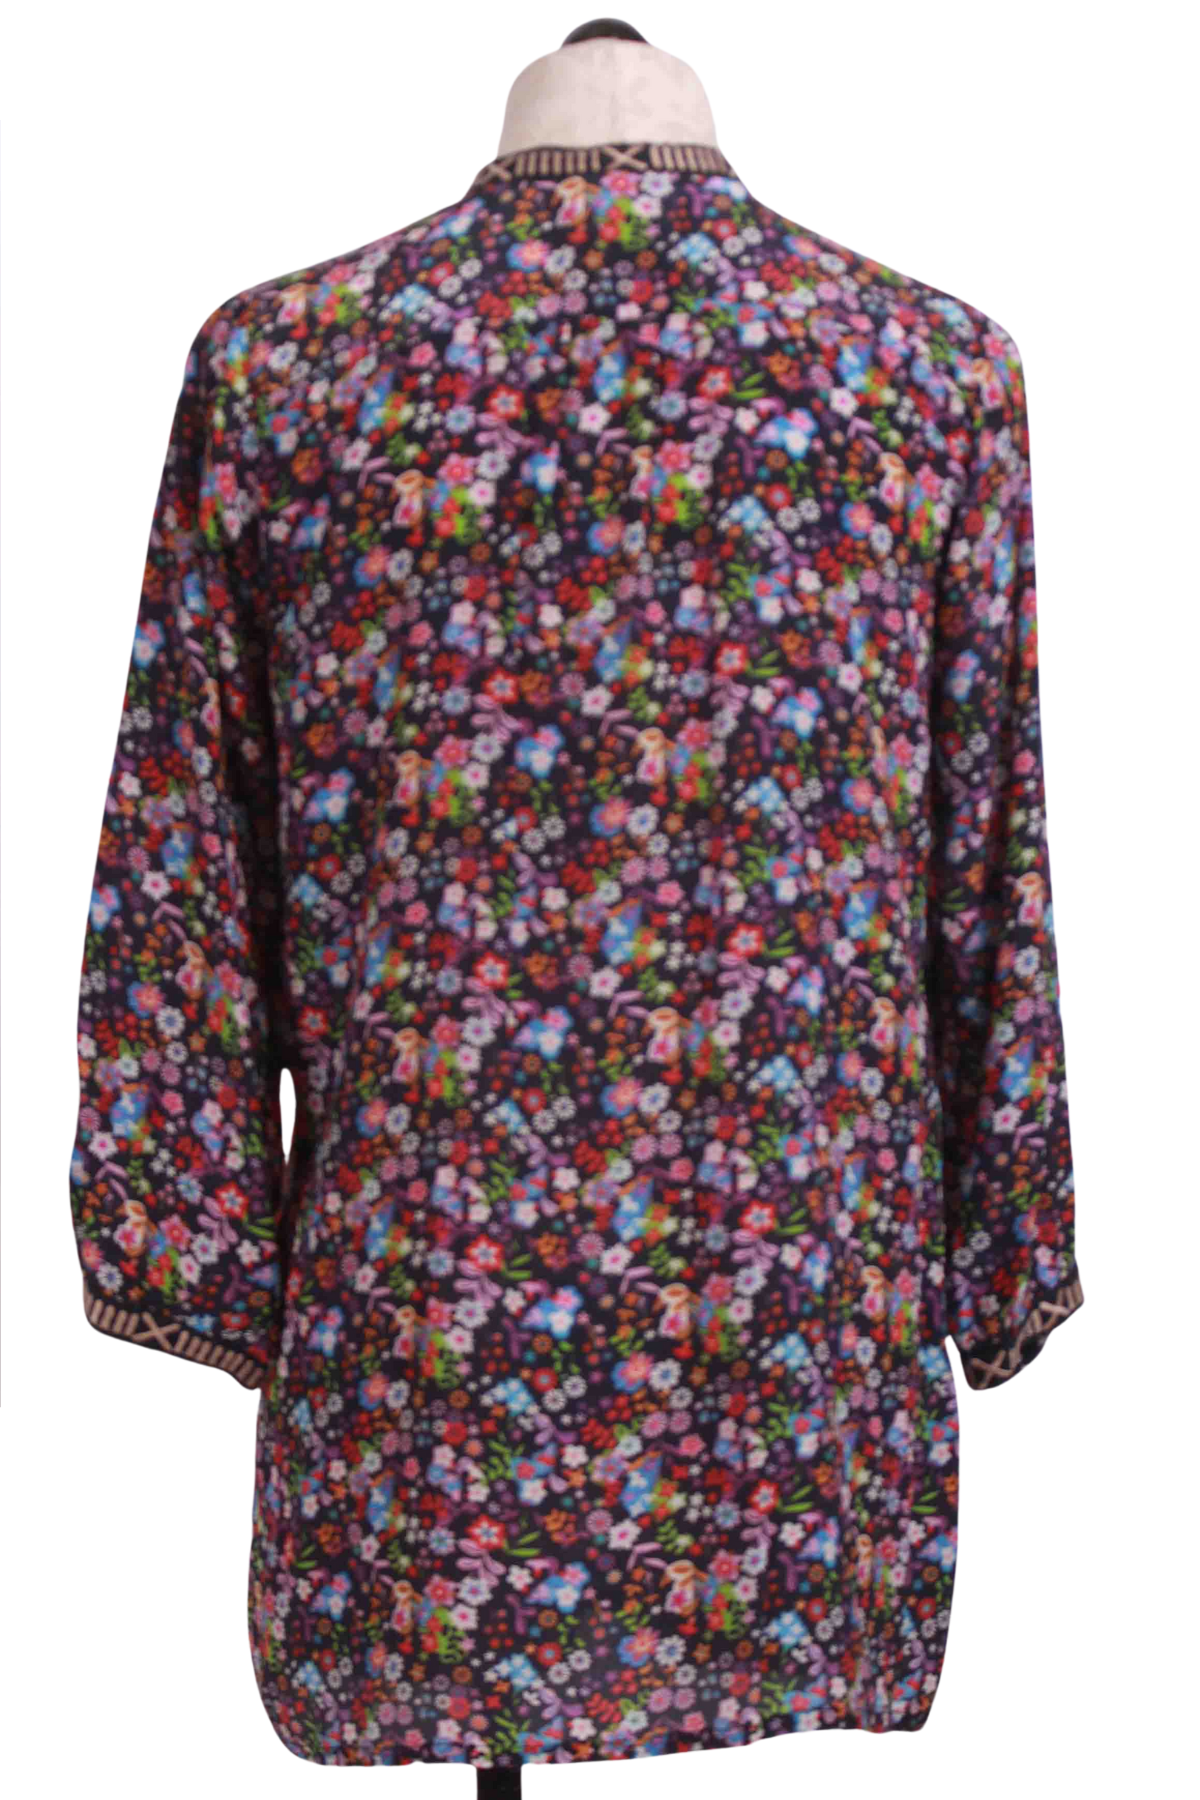 back view of Floral Nite Cordia Tunic by Johnny Was